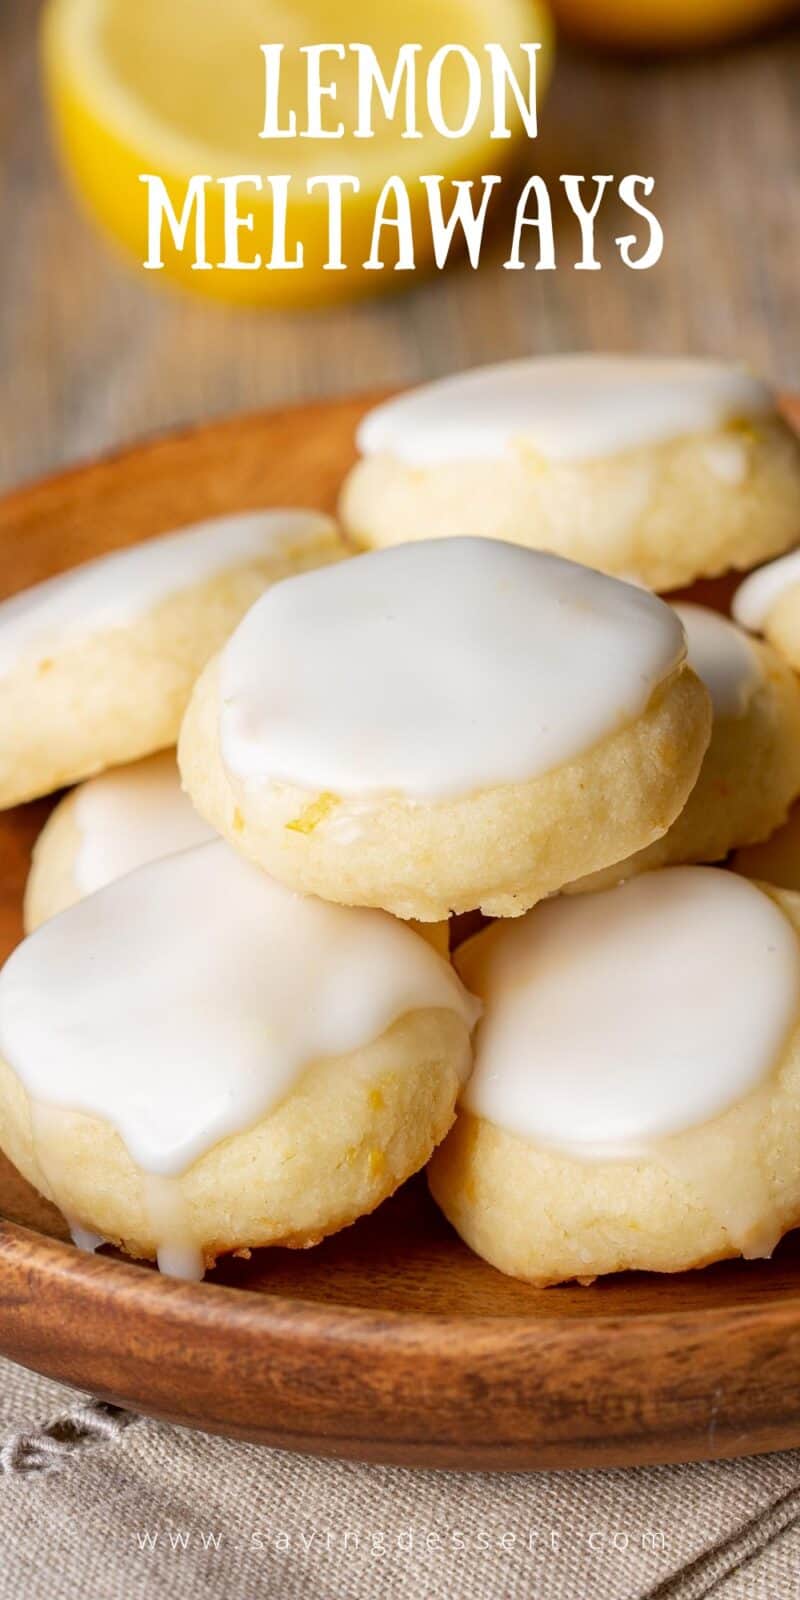 A wooden plate filled with iced lemon cookies